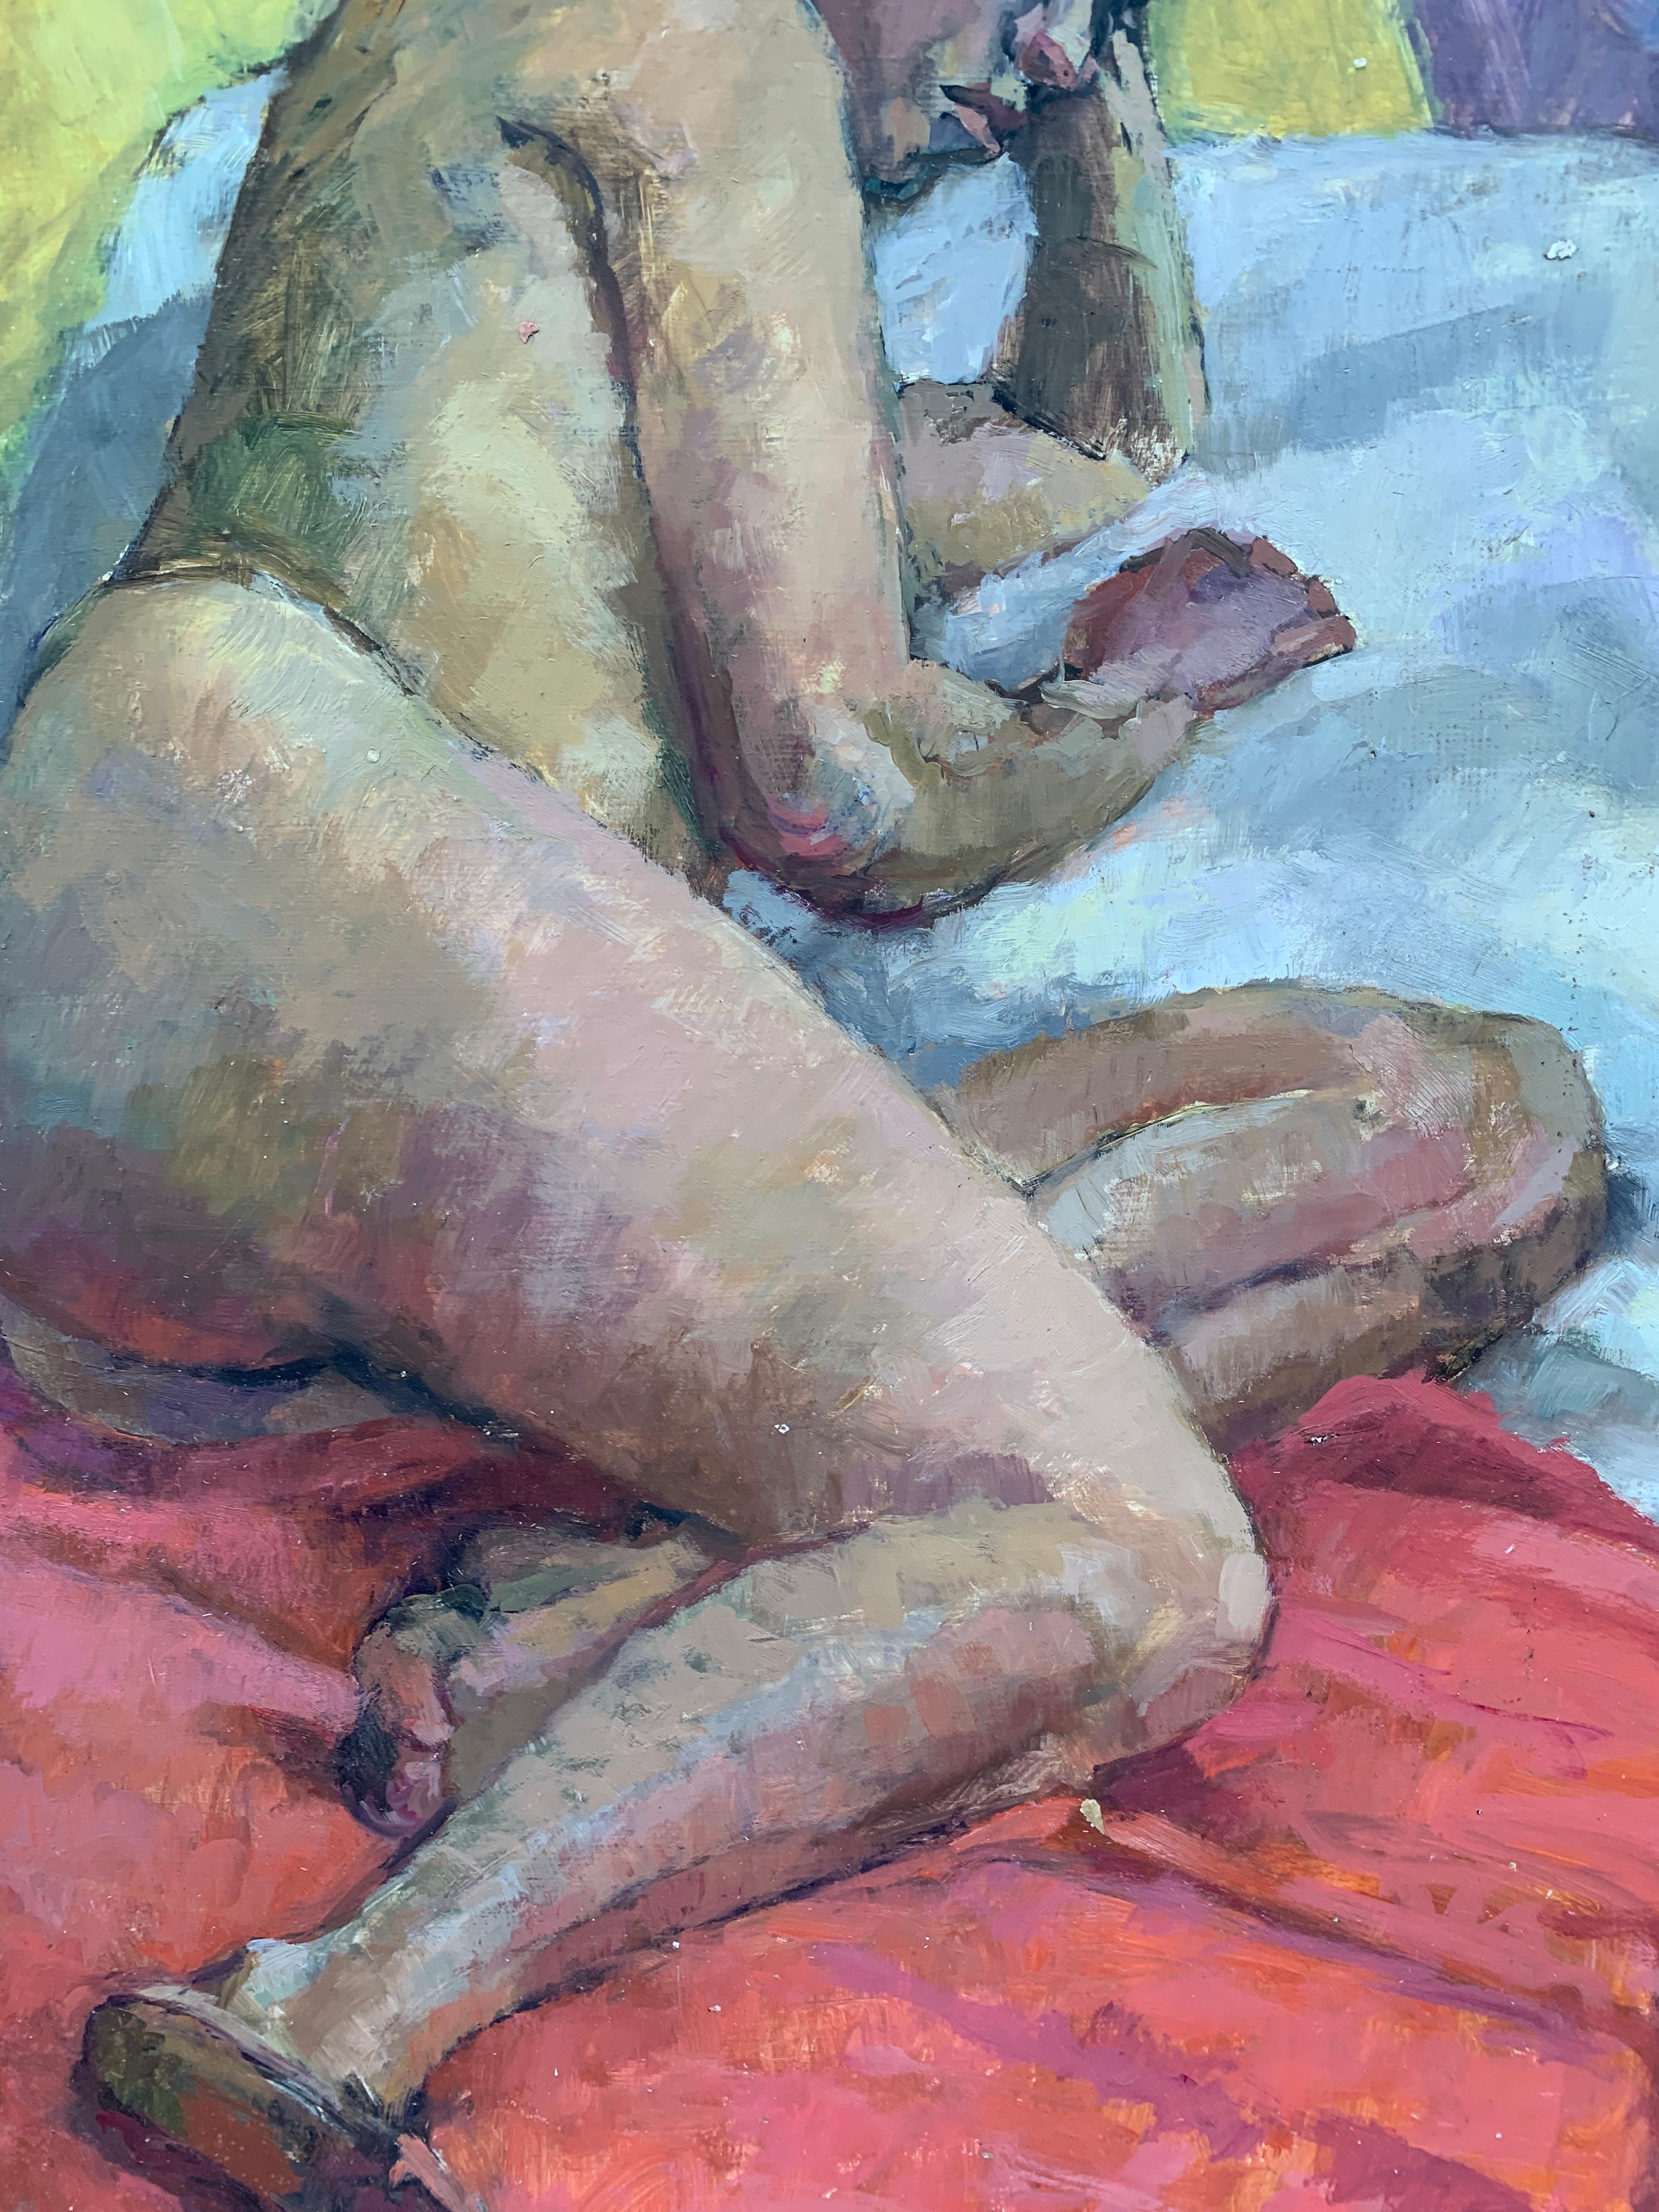 1950's Mid Century modern oil portrait of a nude woman laying on a bed - Abstract Impressionist Painting by Laure Jessop